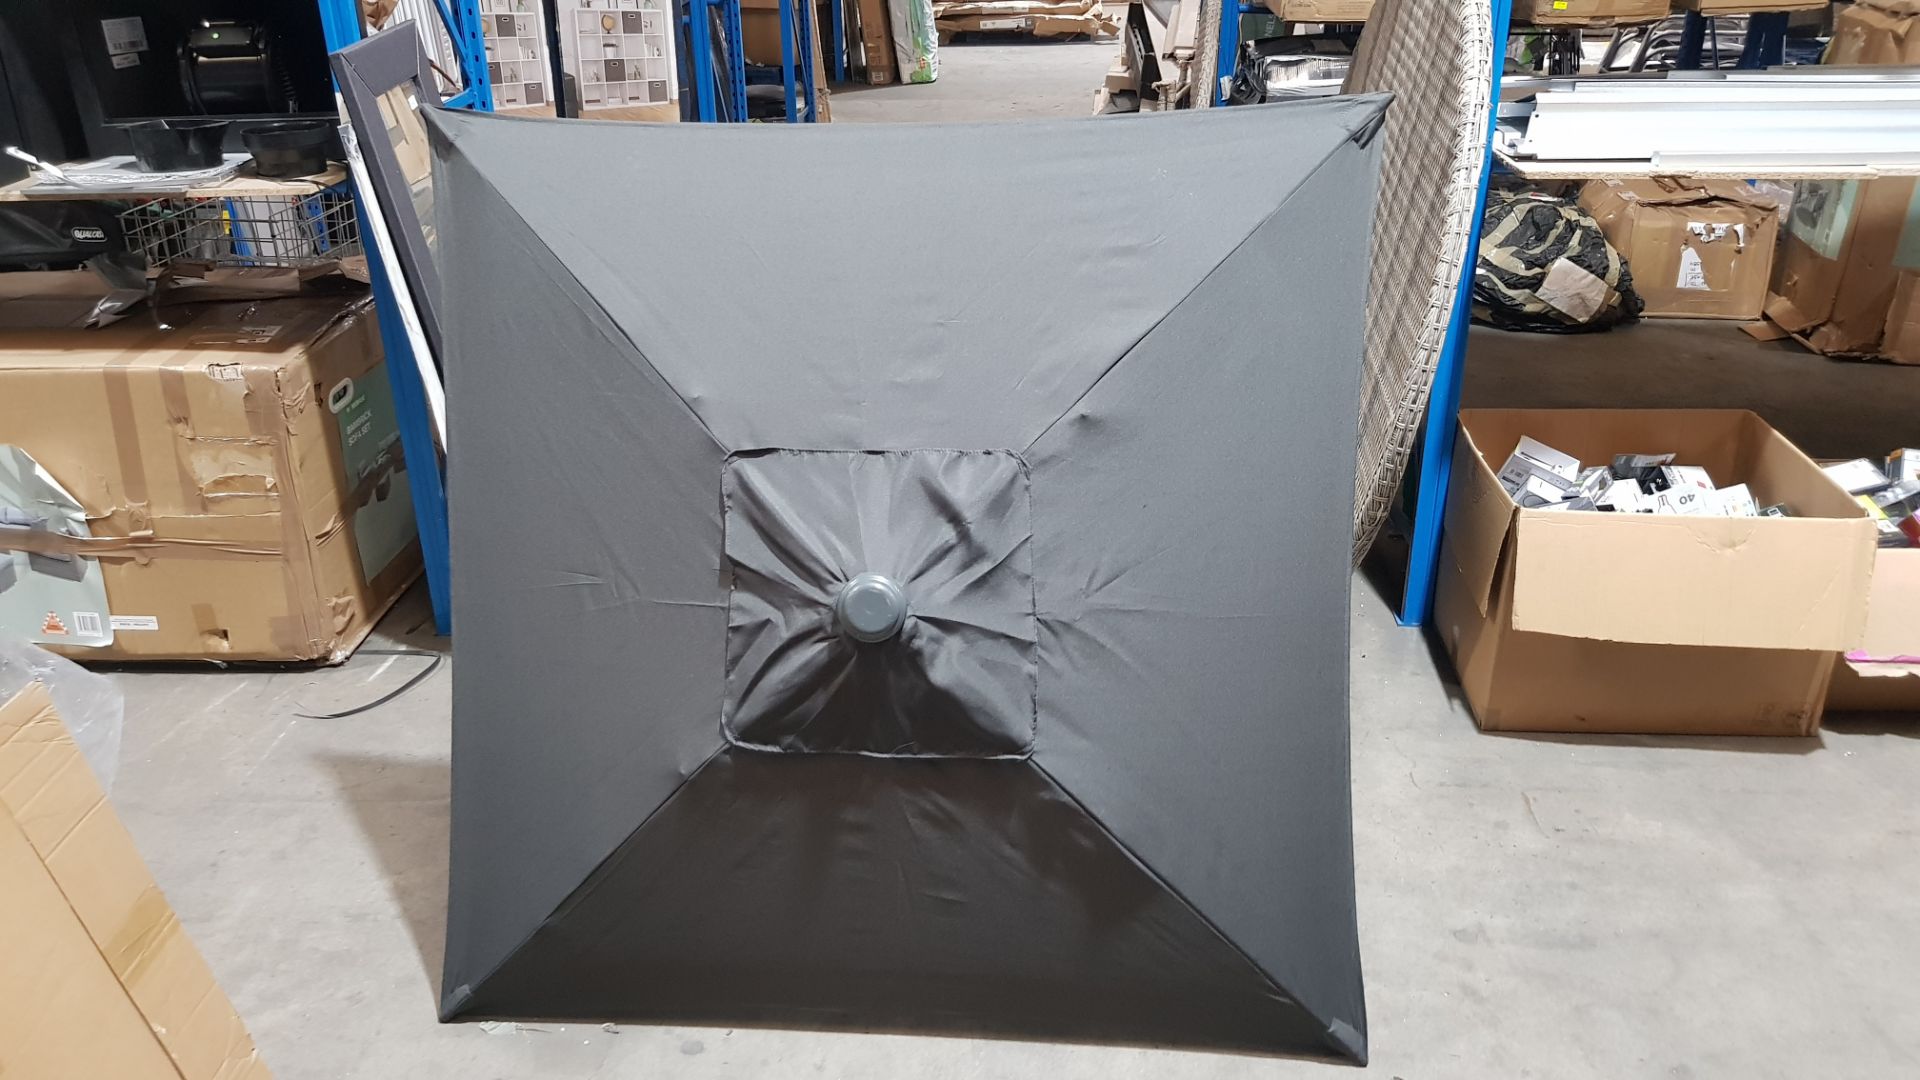 (R7G) 1x Andorra Dark Grey Square Parasol. Packaged Dimensions (110x 20x 10cm). Extended Dimensions - Image 6 of 7